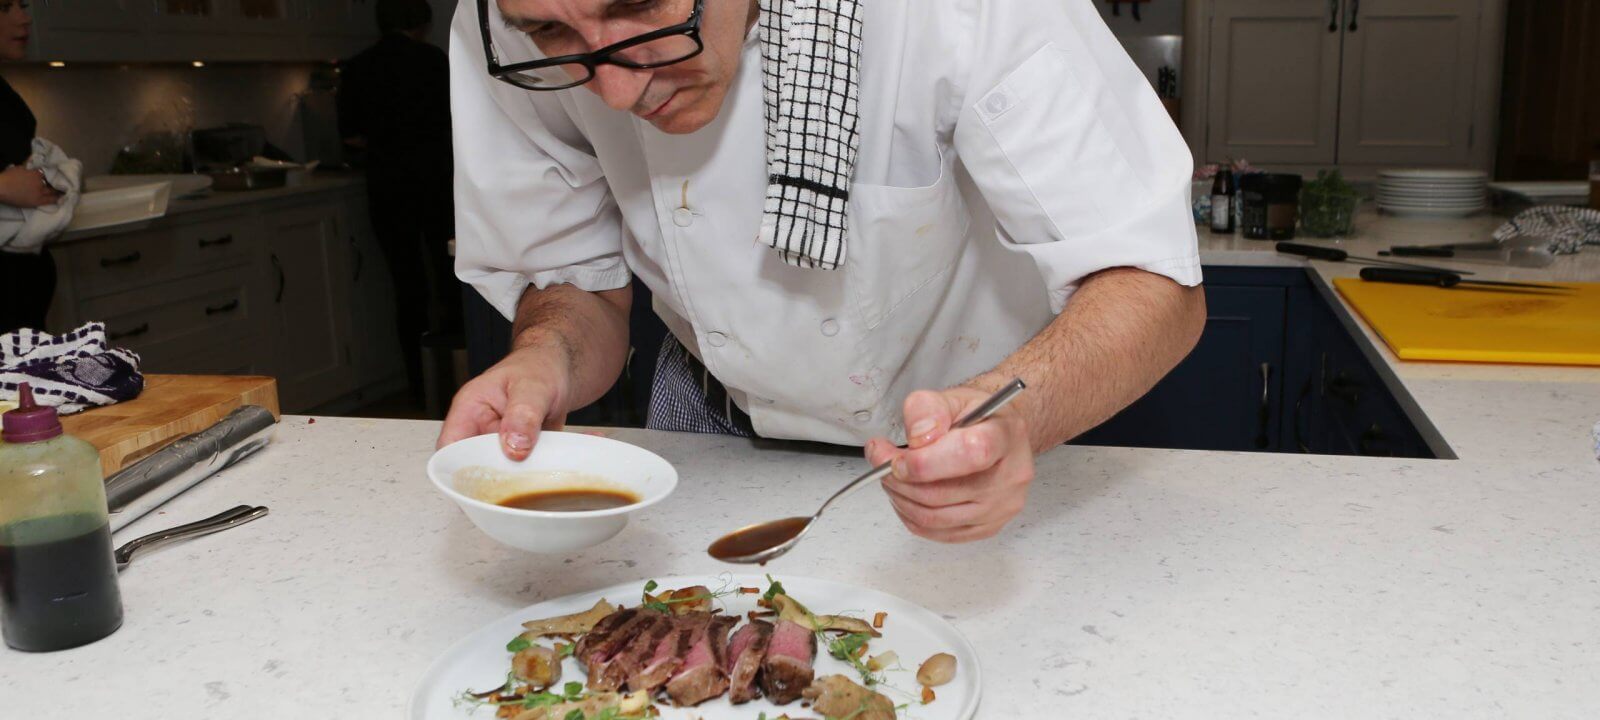 Chef adding finishing touches to meat dish